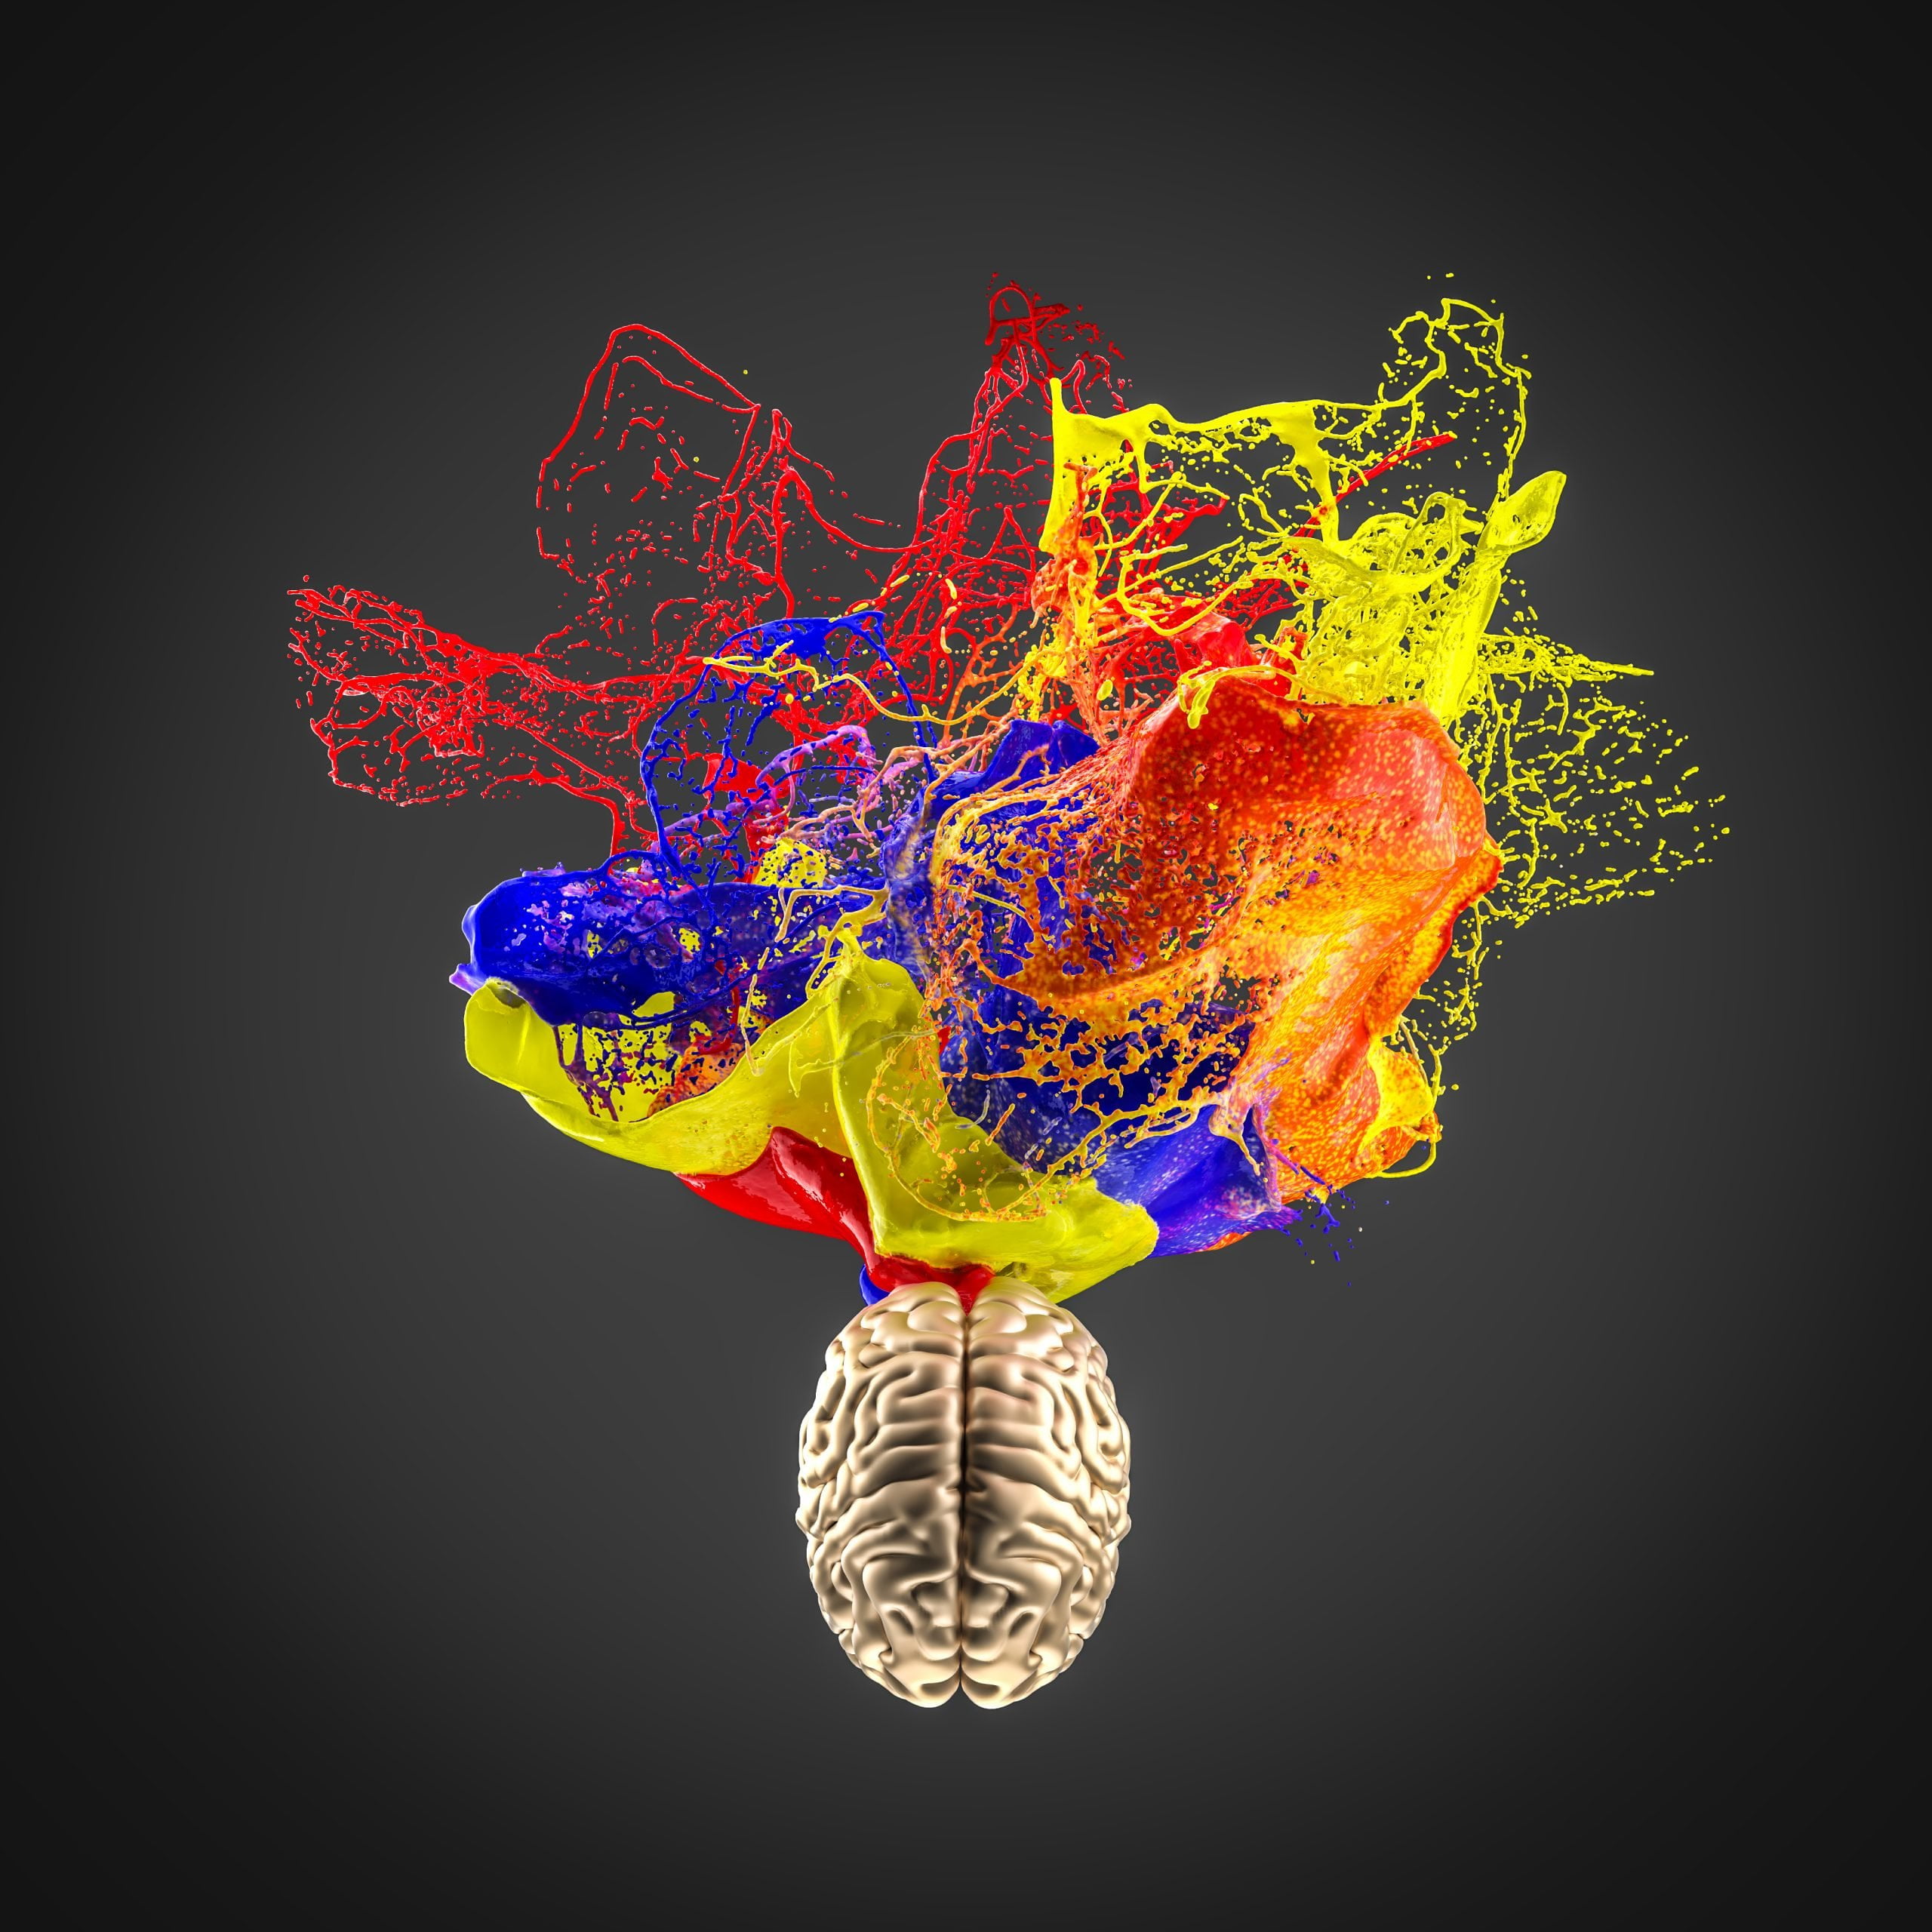 3d image of a gold colored human brain and an explosion of color.